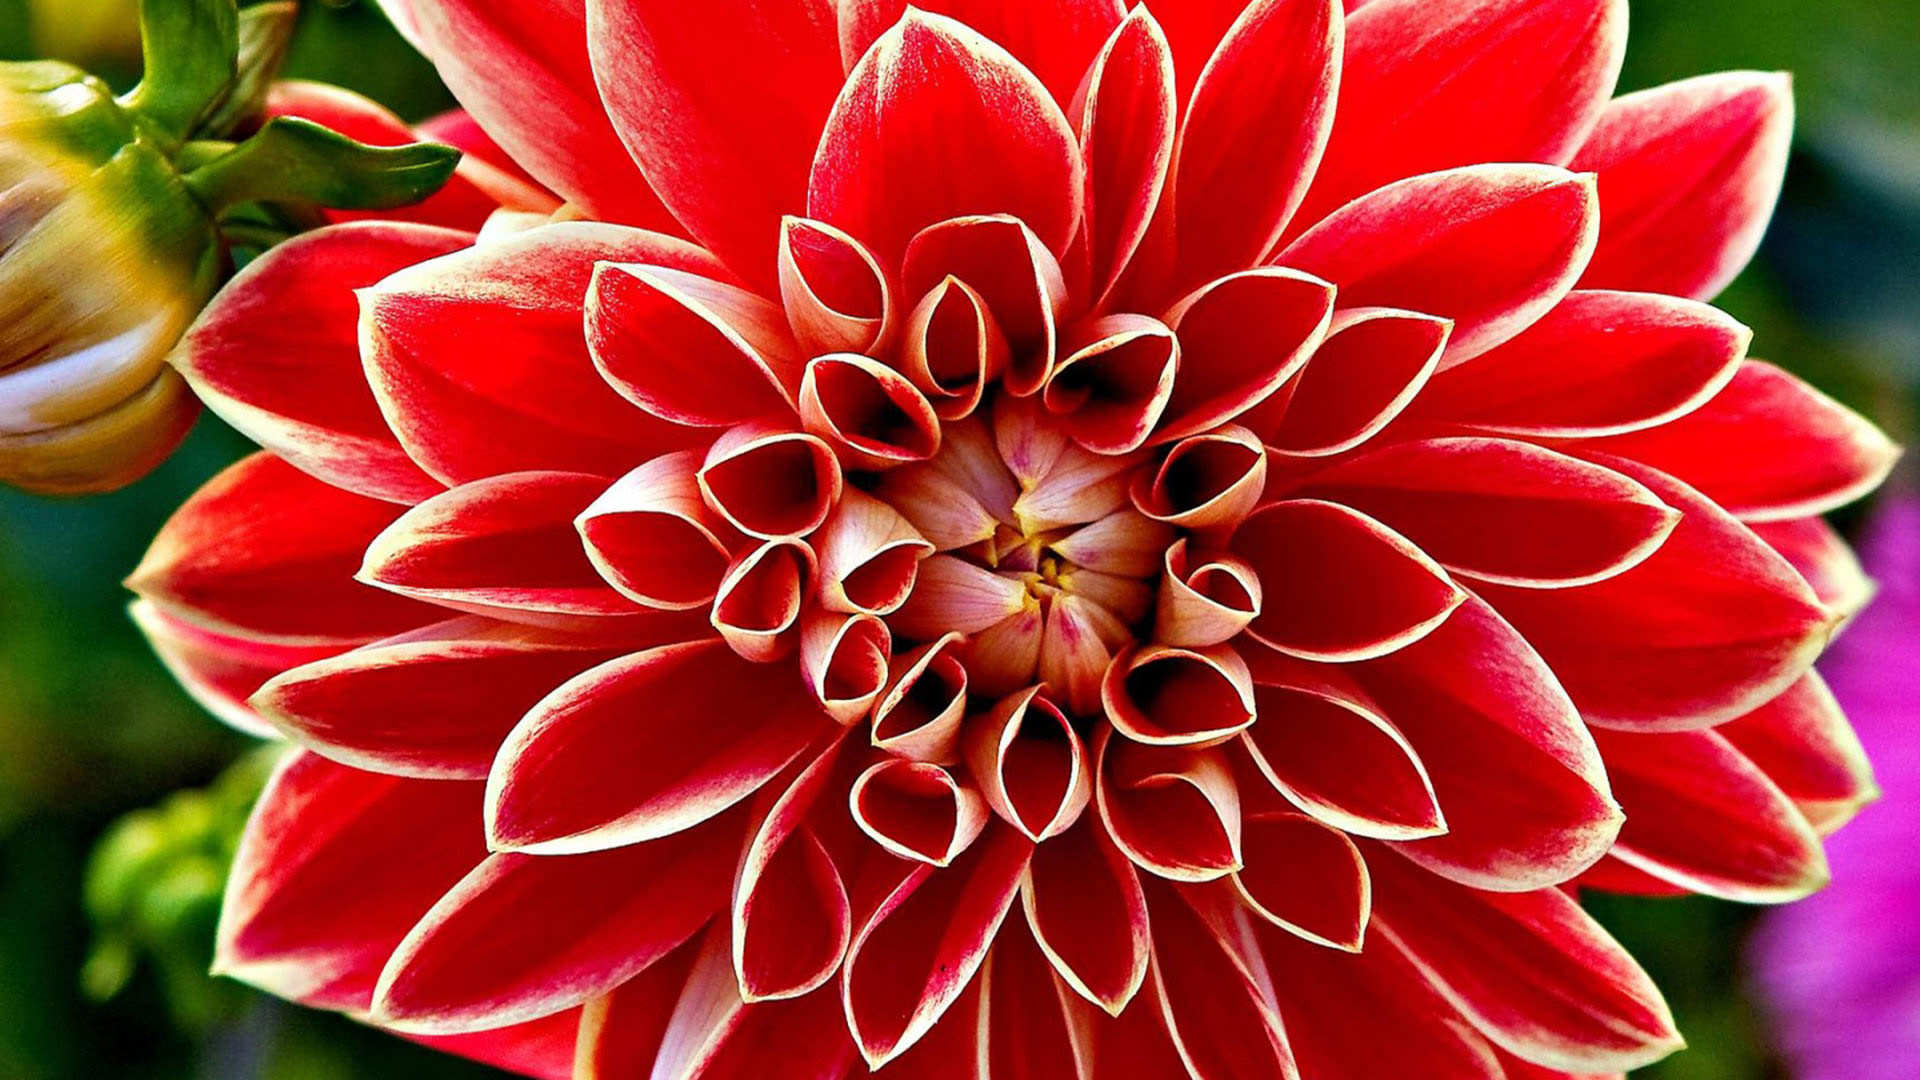 red flower image hd